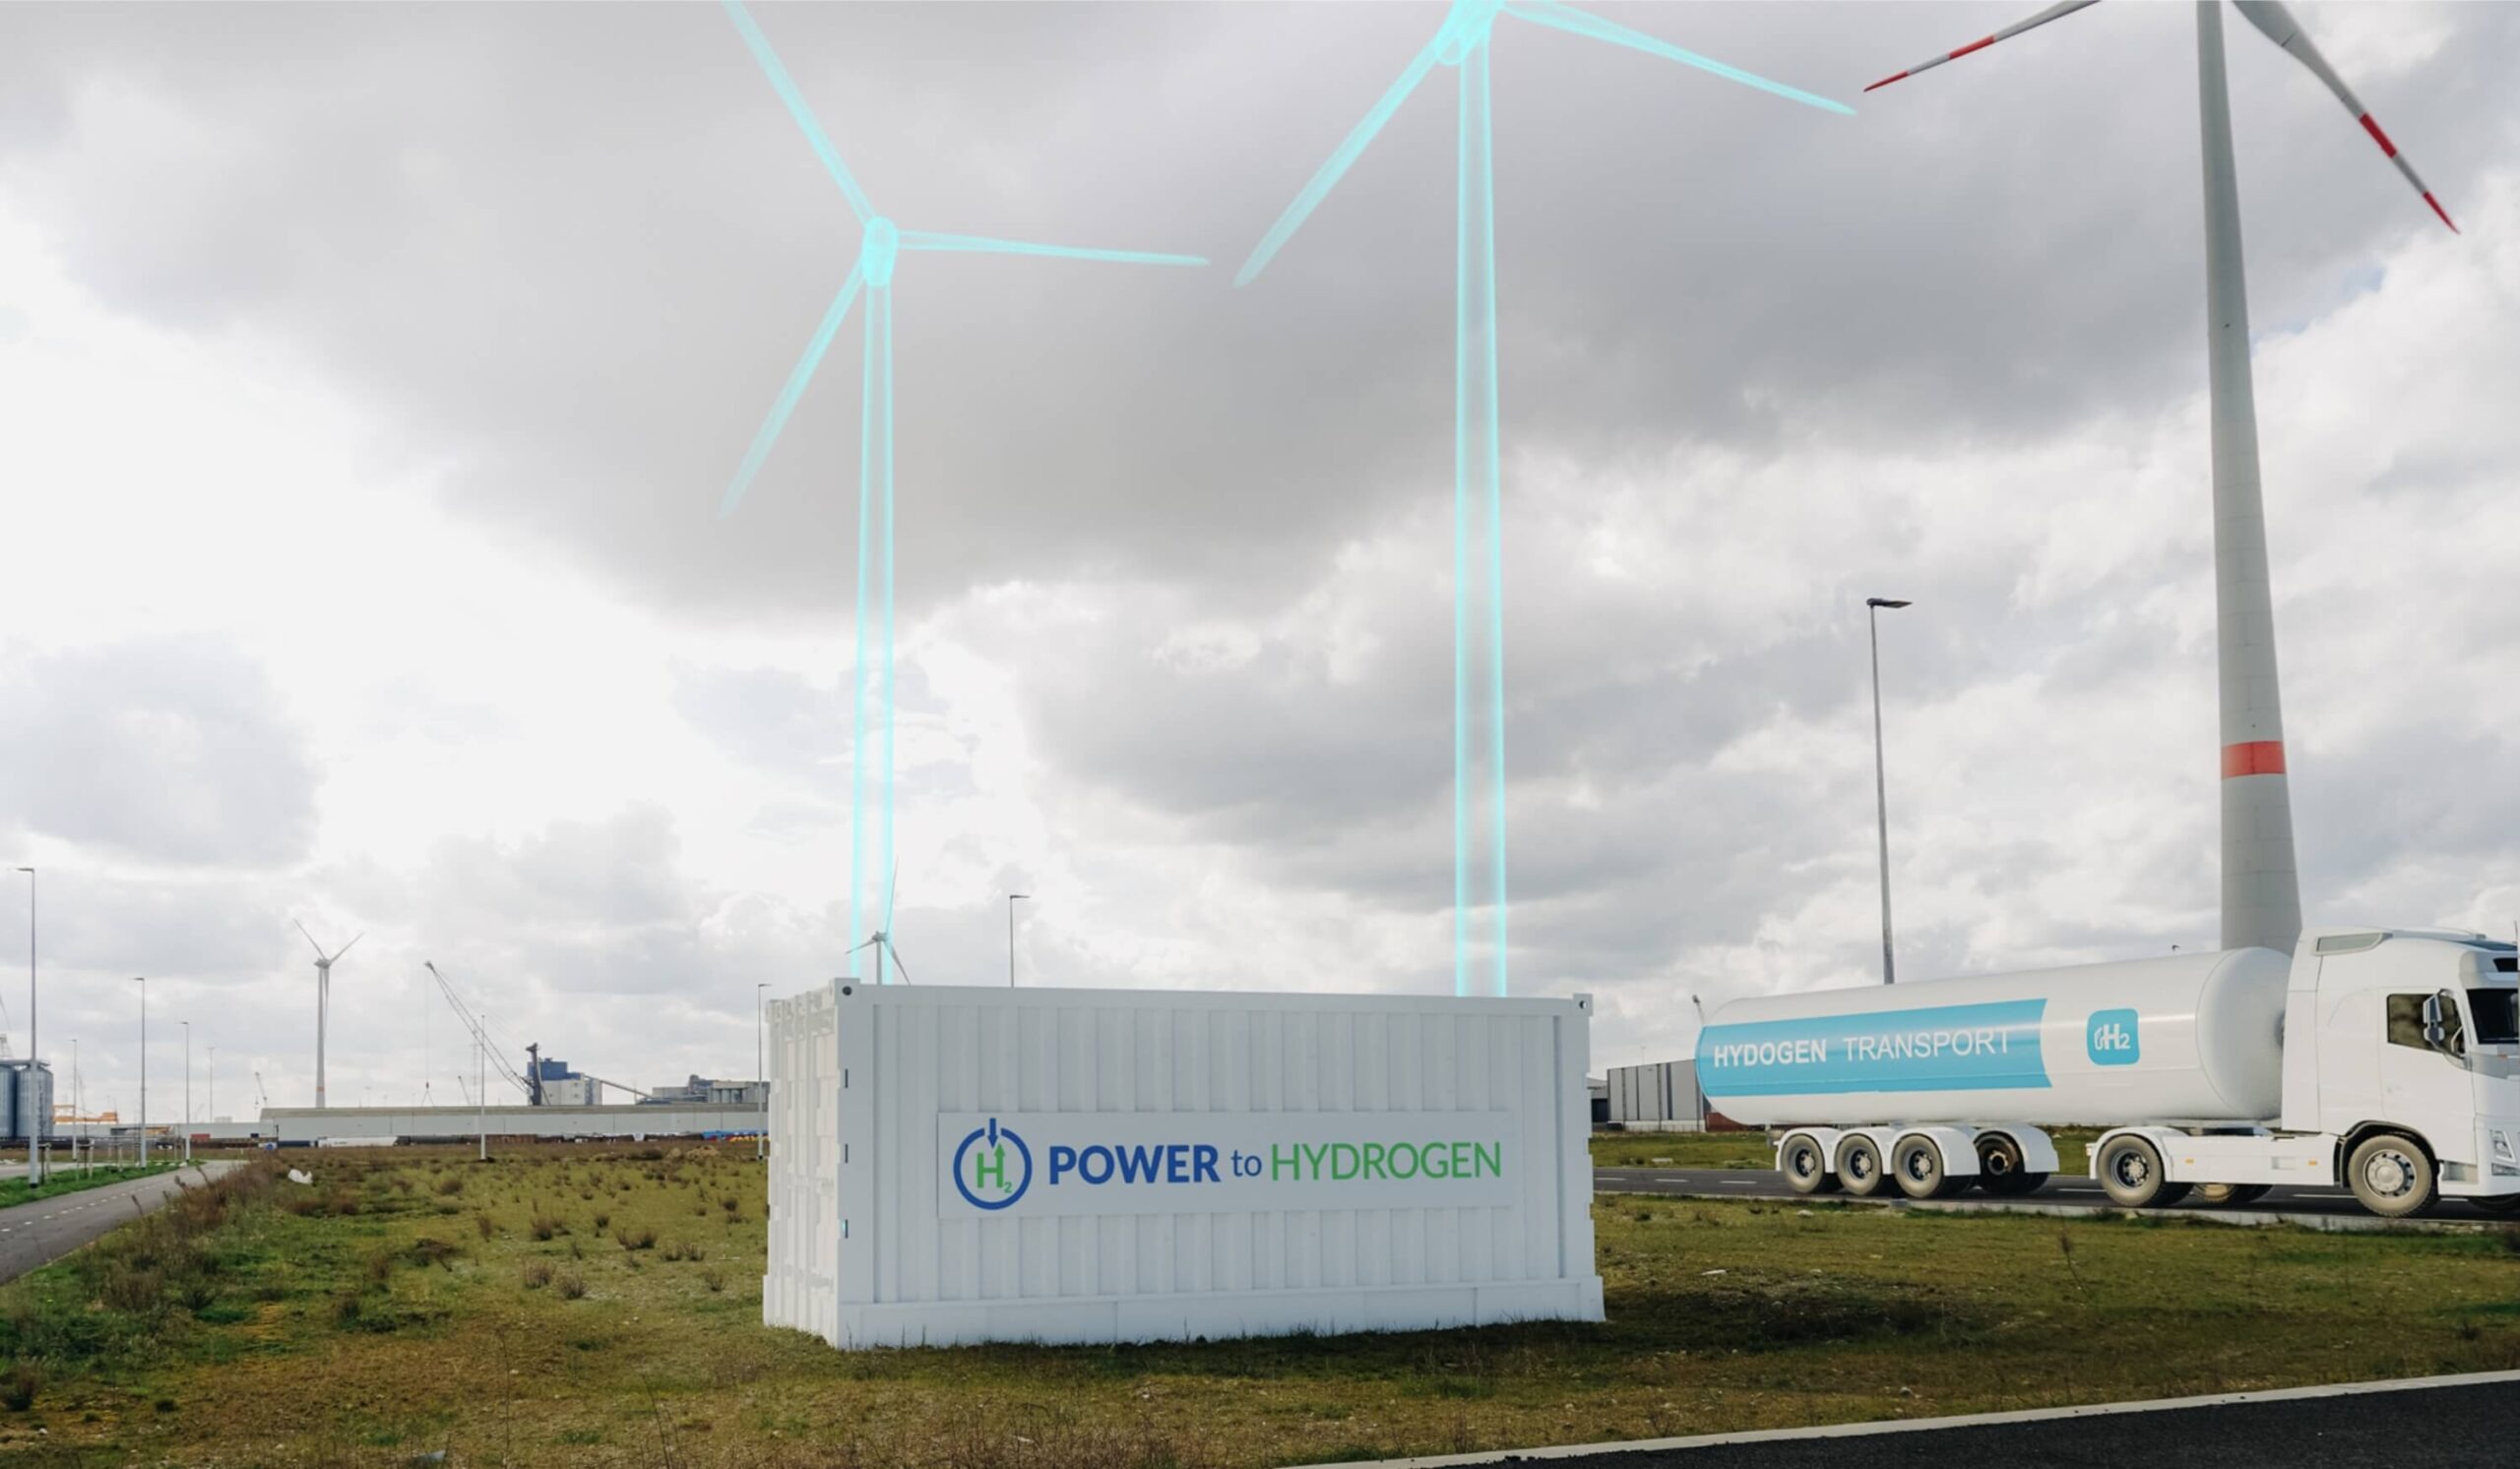 Power to Hydrogen Sets Milestone with World's Largest AEM Electrolyzer at Port of Antwerp-Bruges